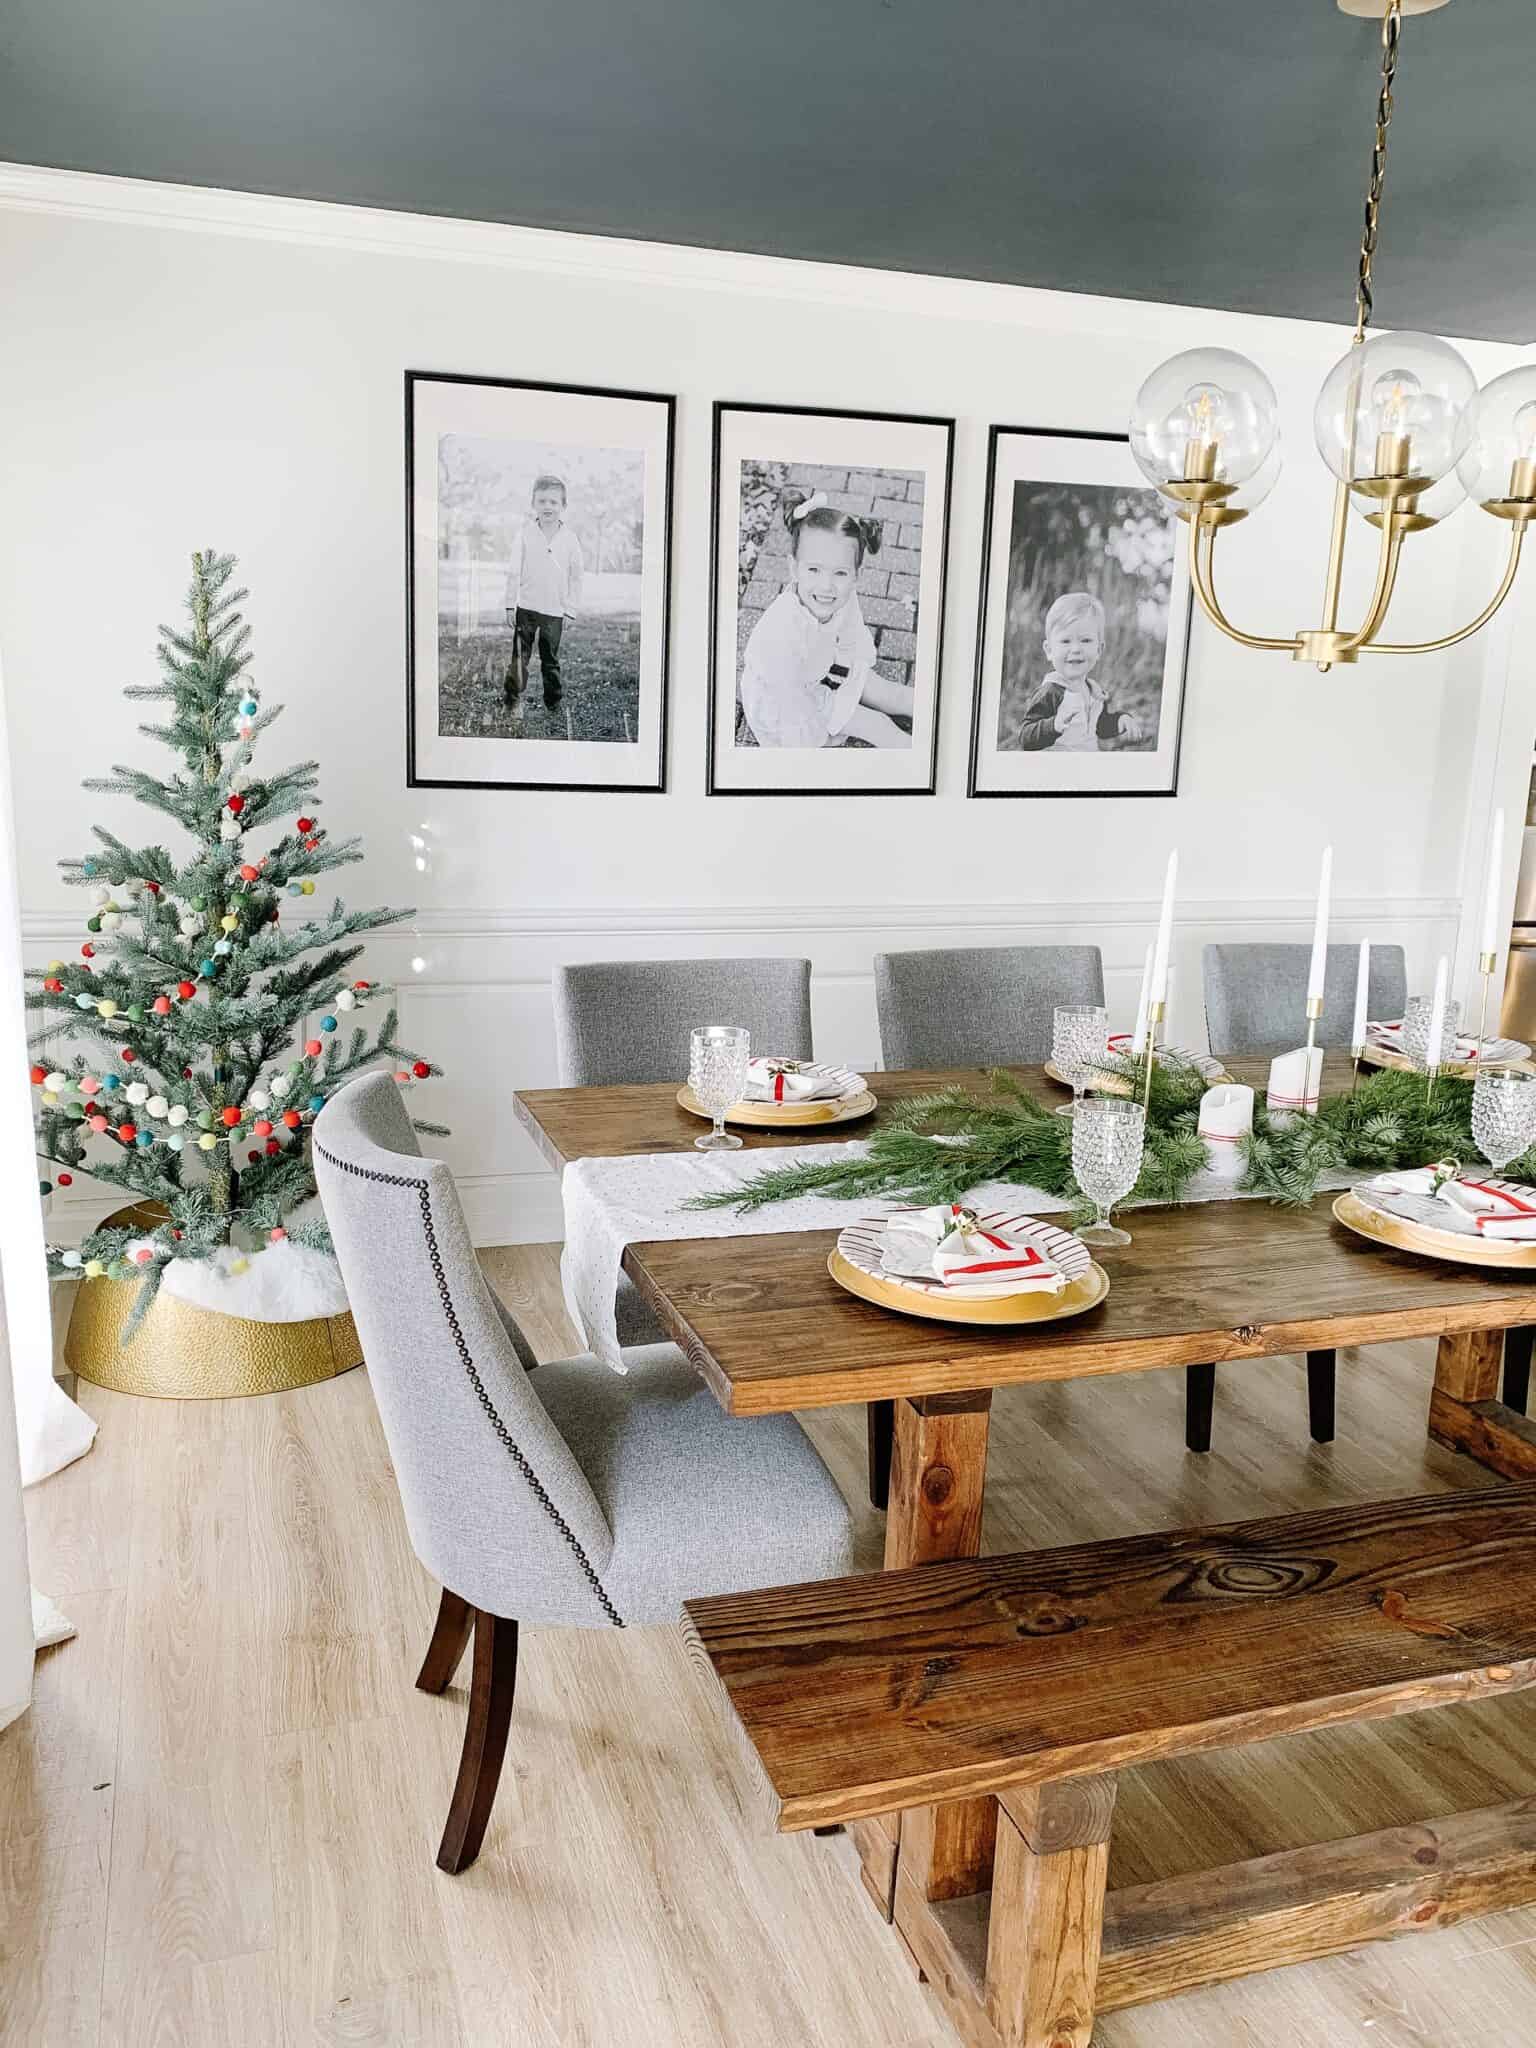 Candy Cane Inspired Dining Room Table Decor   arinsolangeathome